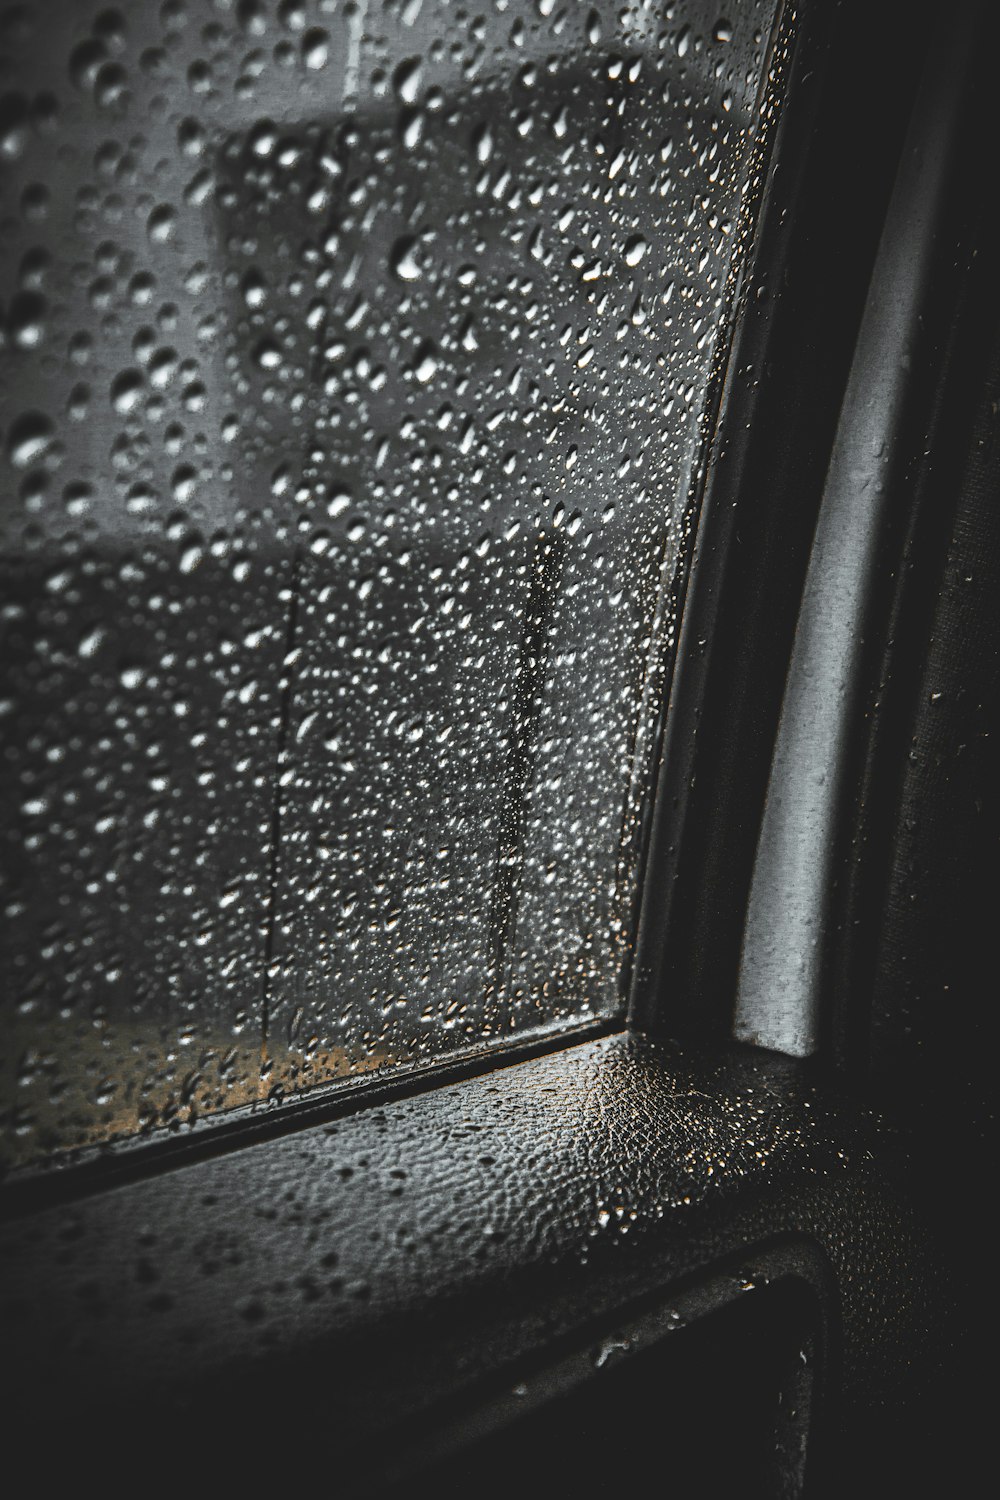 a close up of a car window with rain drops on it